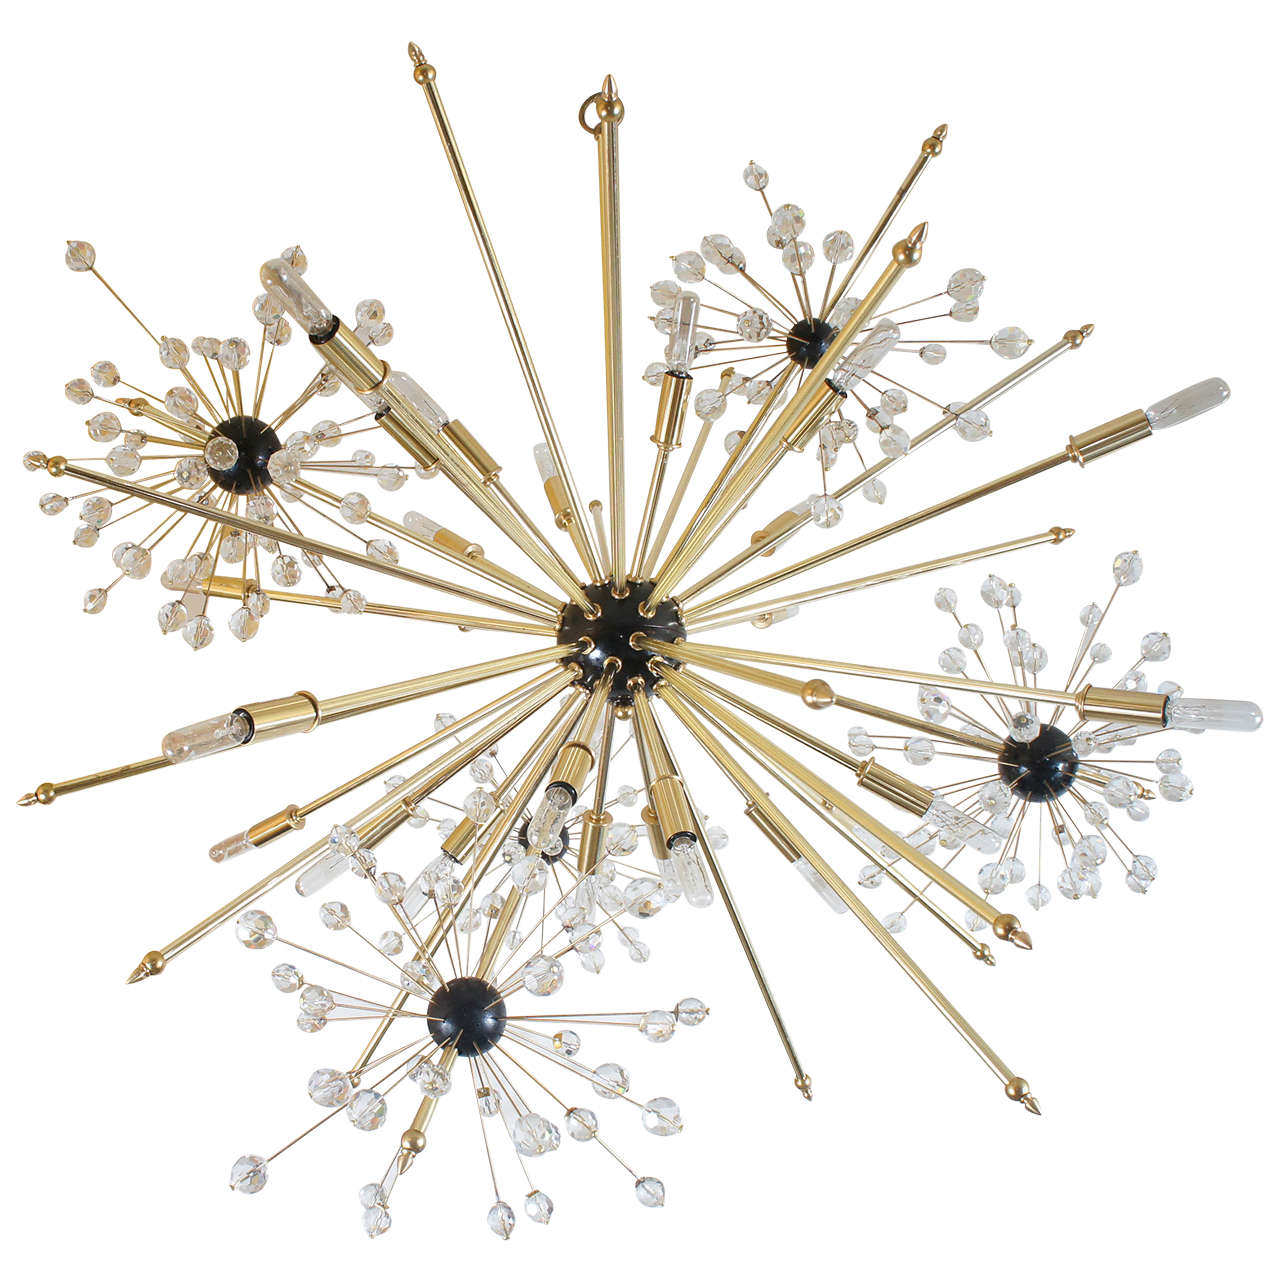 Custom "Etoile" with Crystal Satellites Chandelier, made in the USA by Lou Blass For Sale